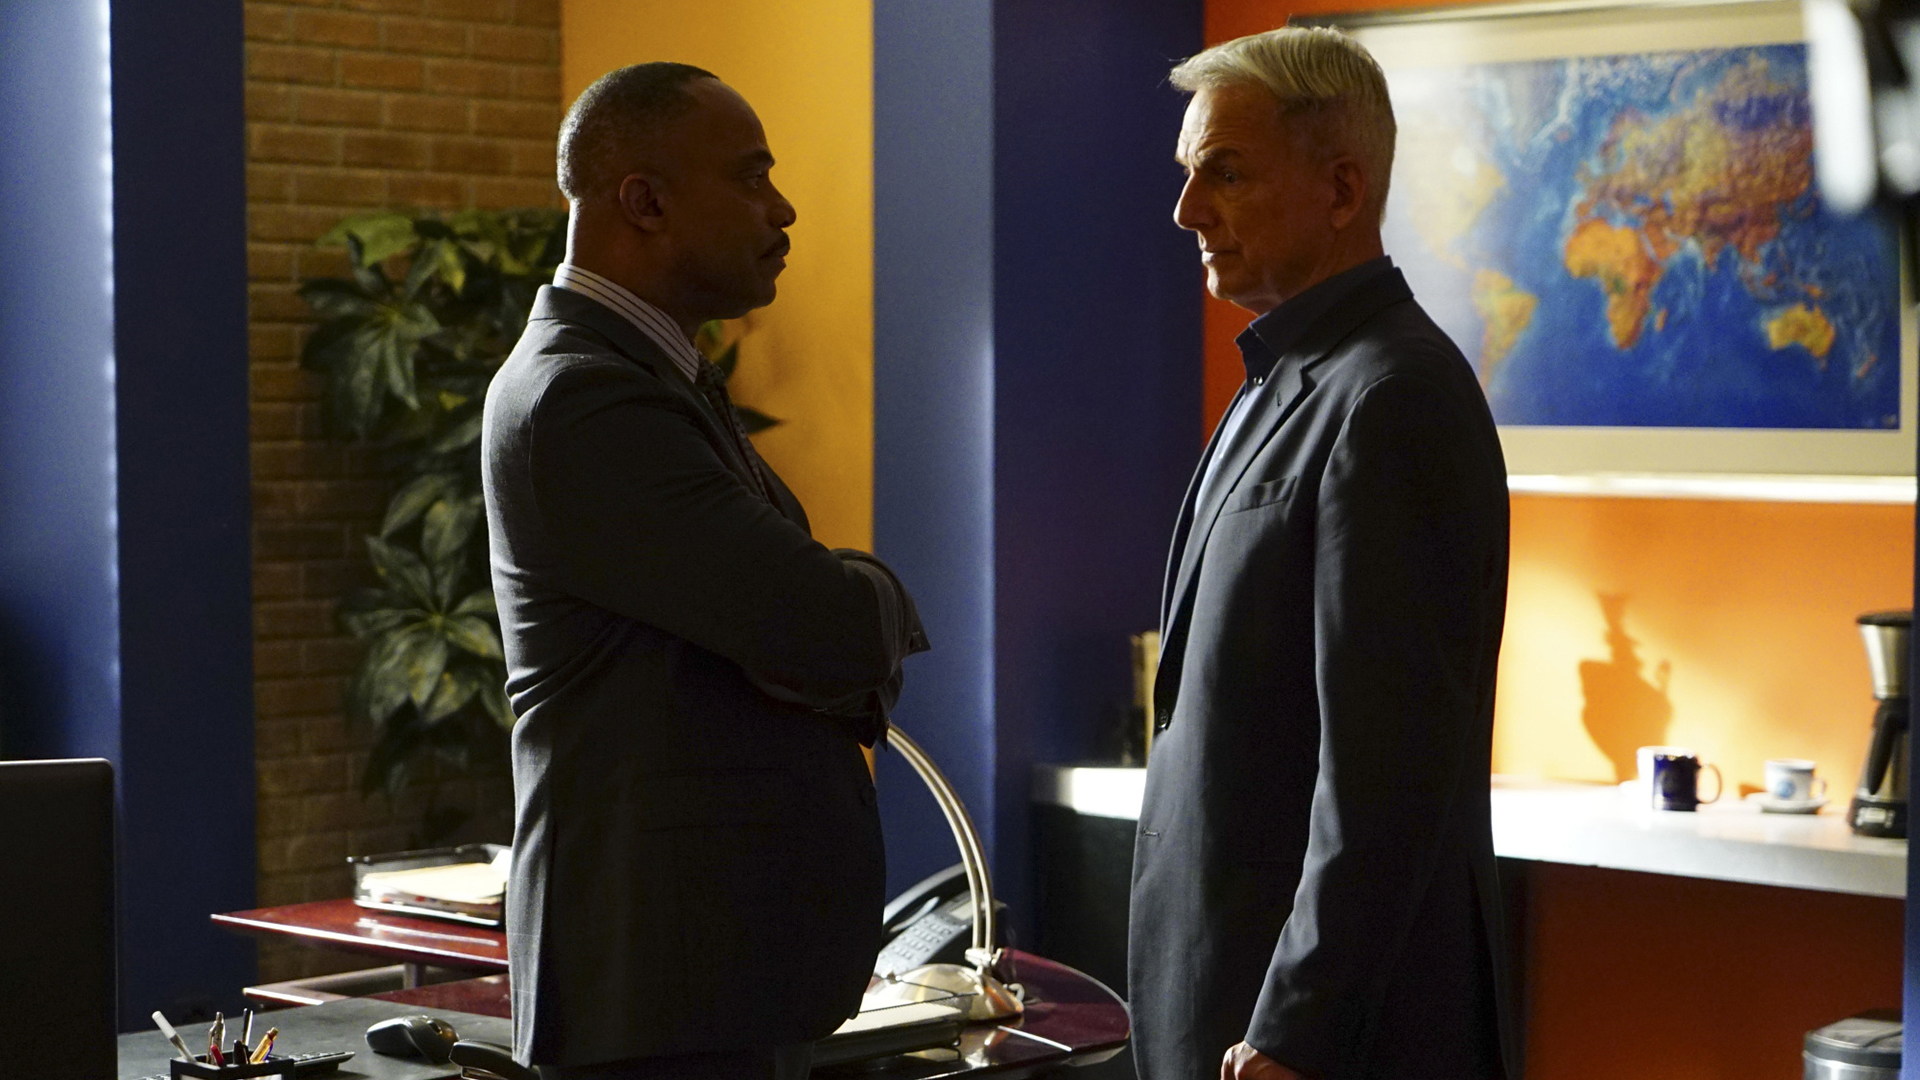 Vance and Gibbs talk things over.